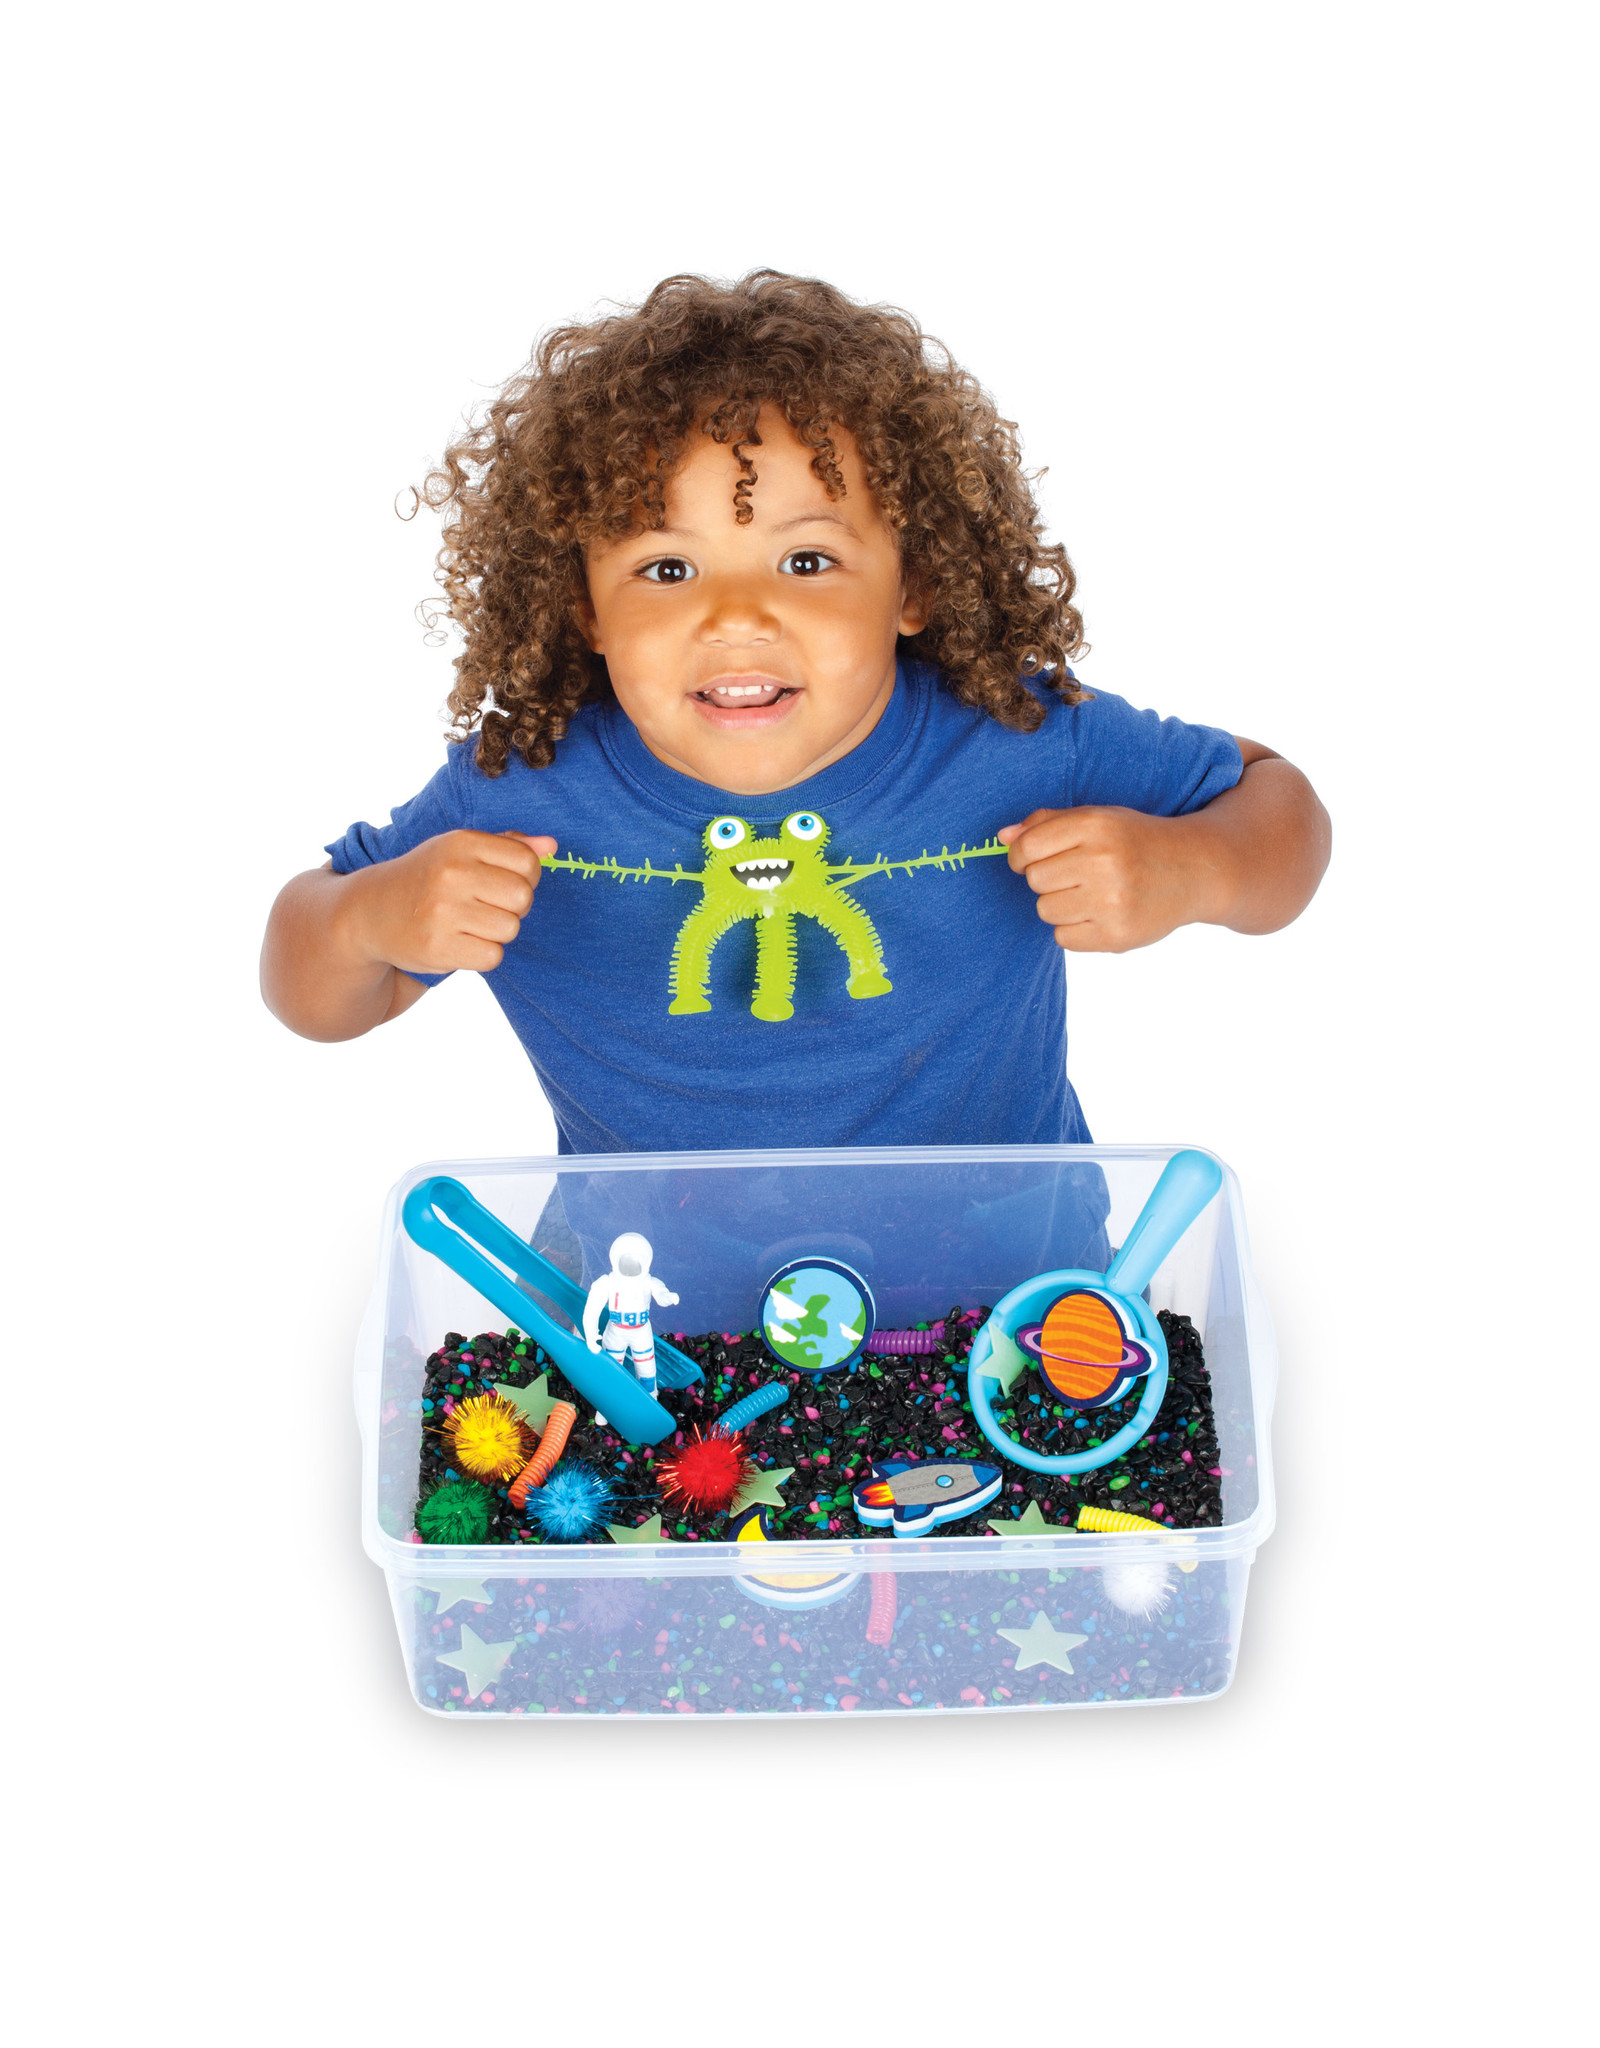 FABER-CASTELL Creativity for Kids Sensory Bin, Outer Space